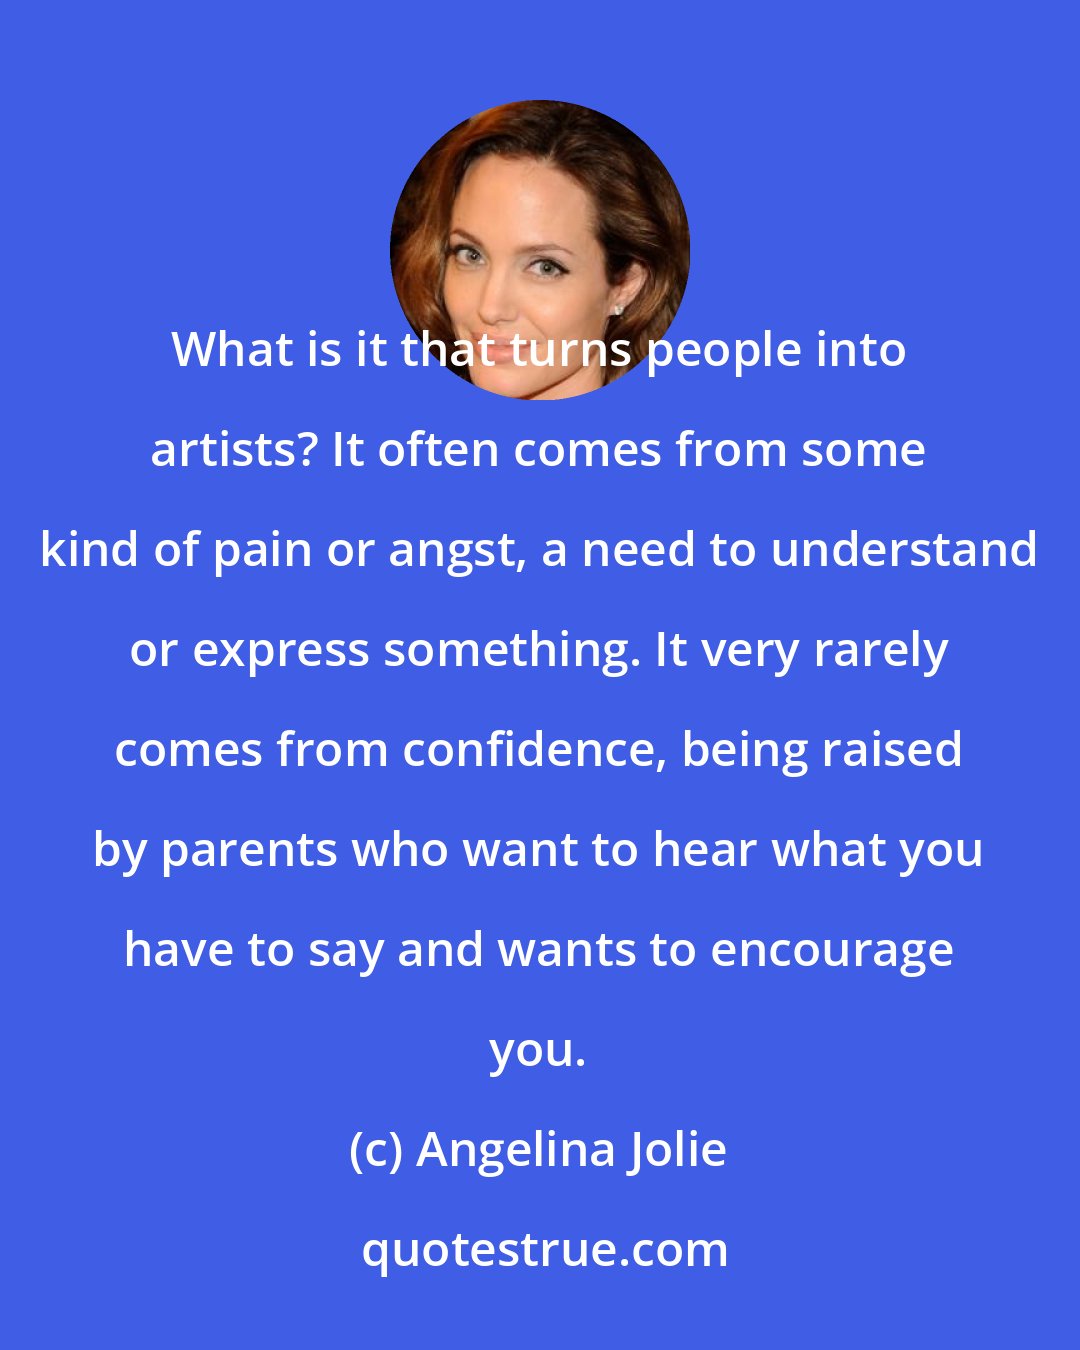 Angelina Jolie: What is it that turns people into artists? It often comes from some kind of pain or angst, a need to understand or express something. It very rarely comes from confidence, being raised by parents who want to hear what you have to say and wants to encourage you.